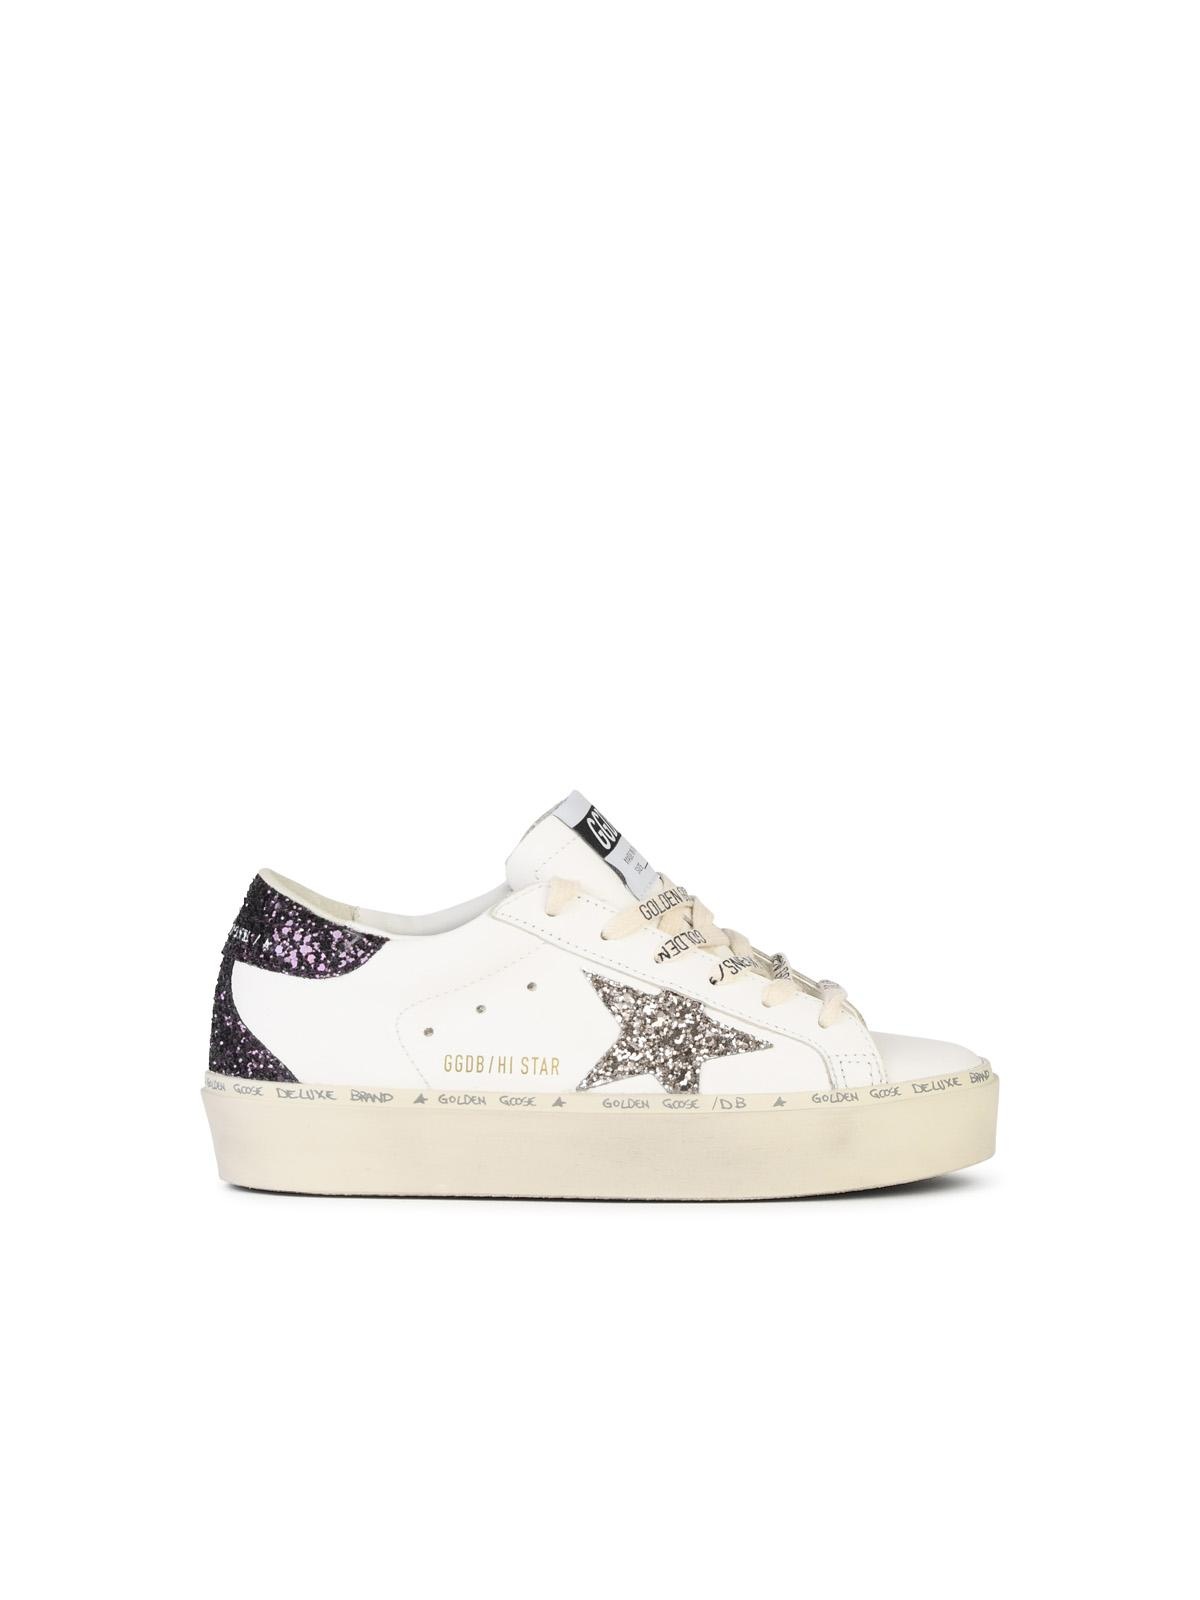 Golden Goose 'Hi Star' White Leather Sneakers Woman - 1